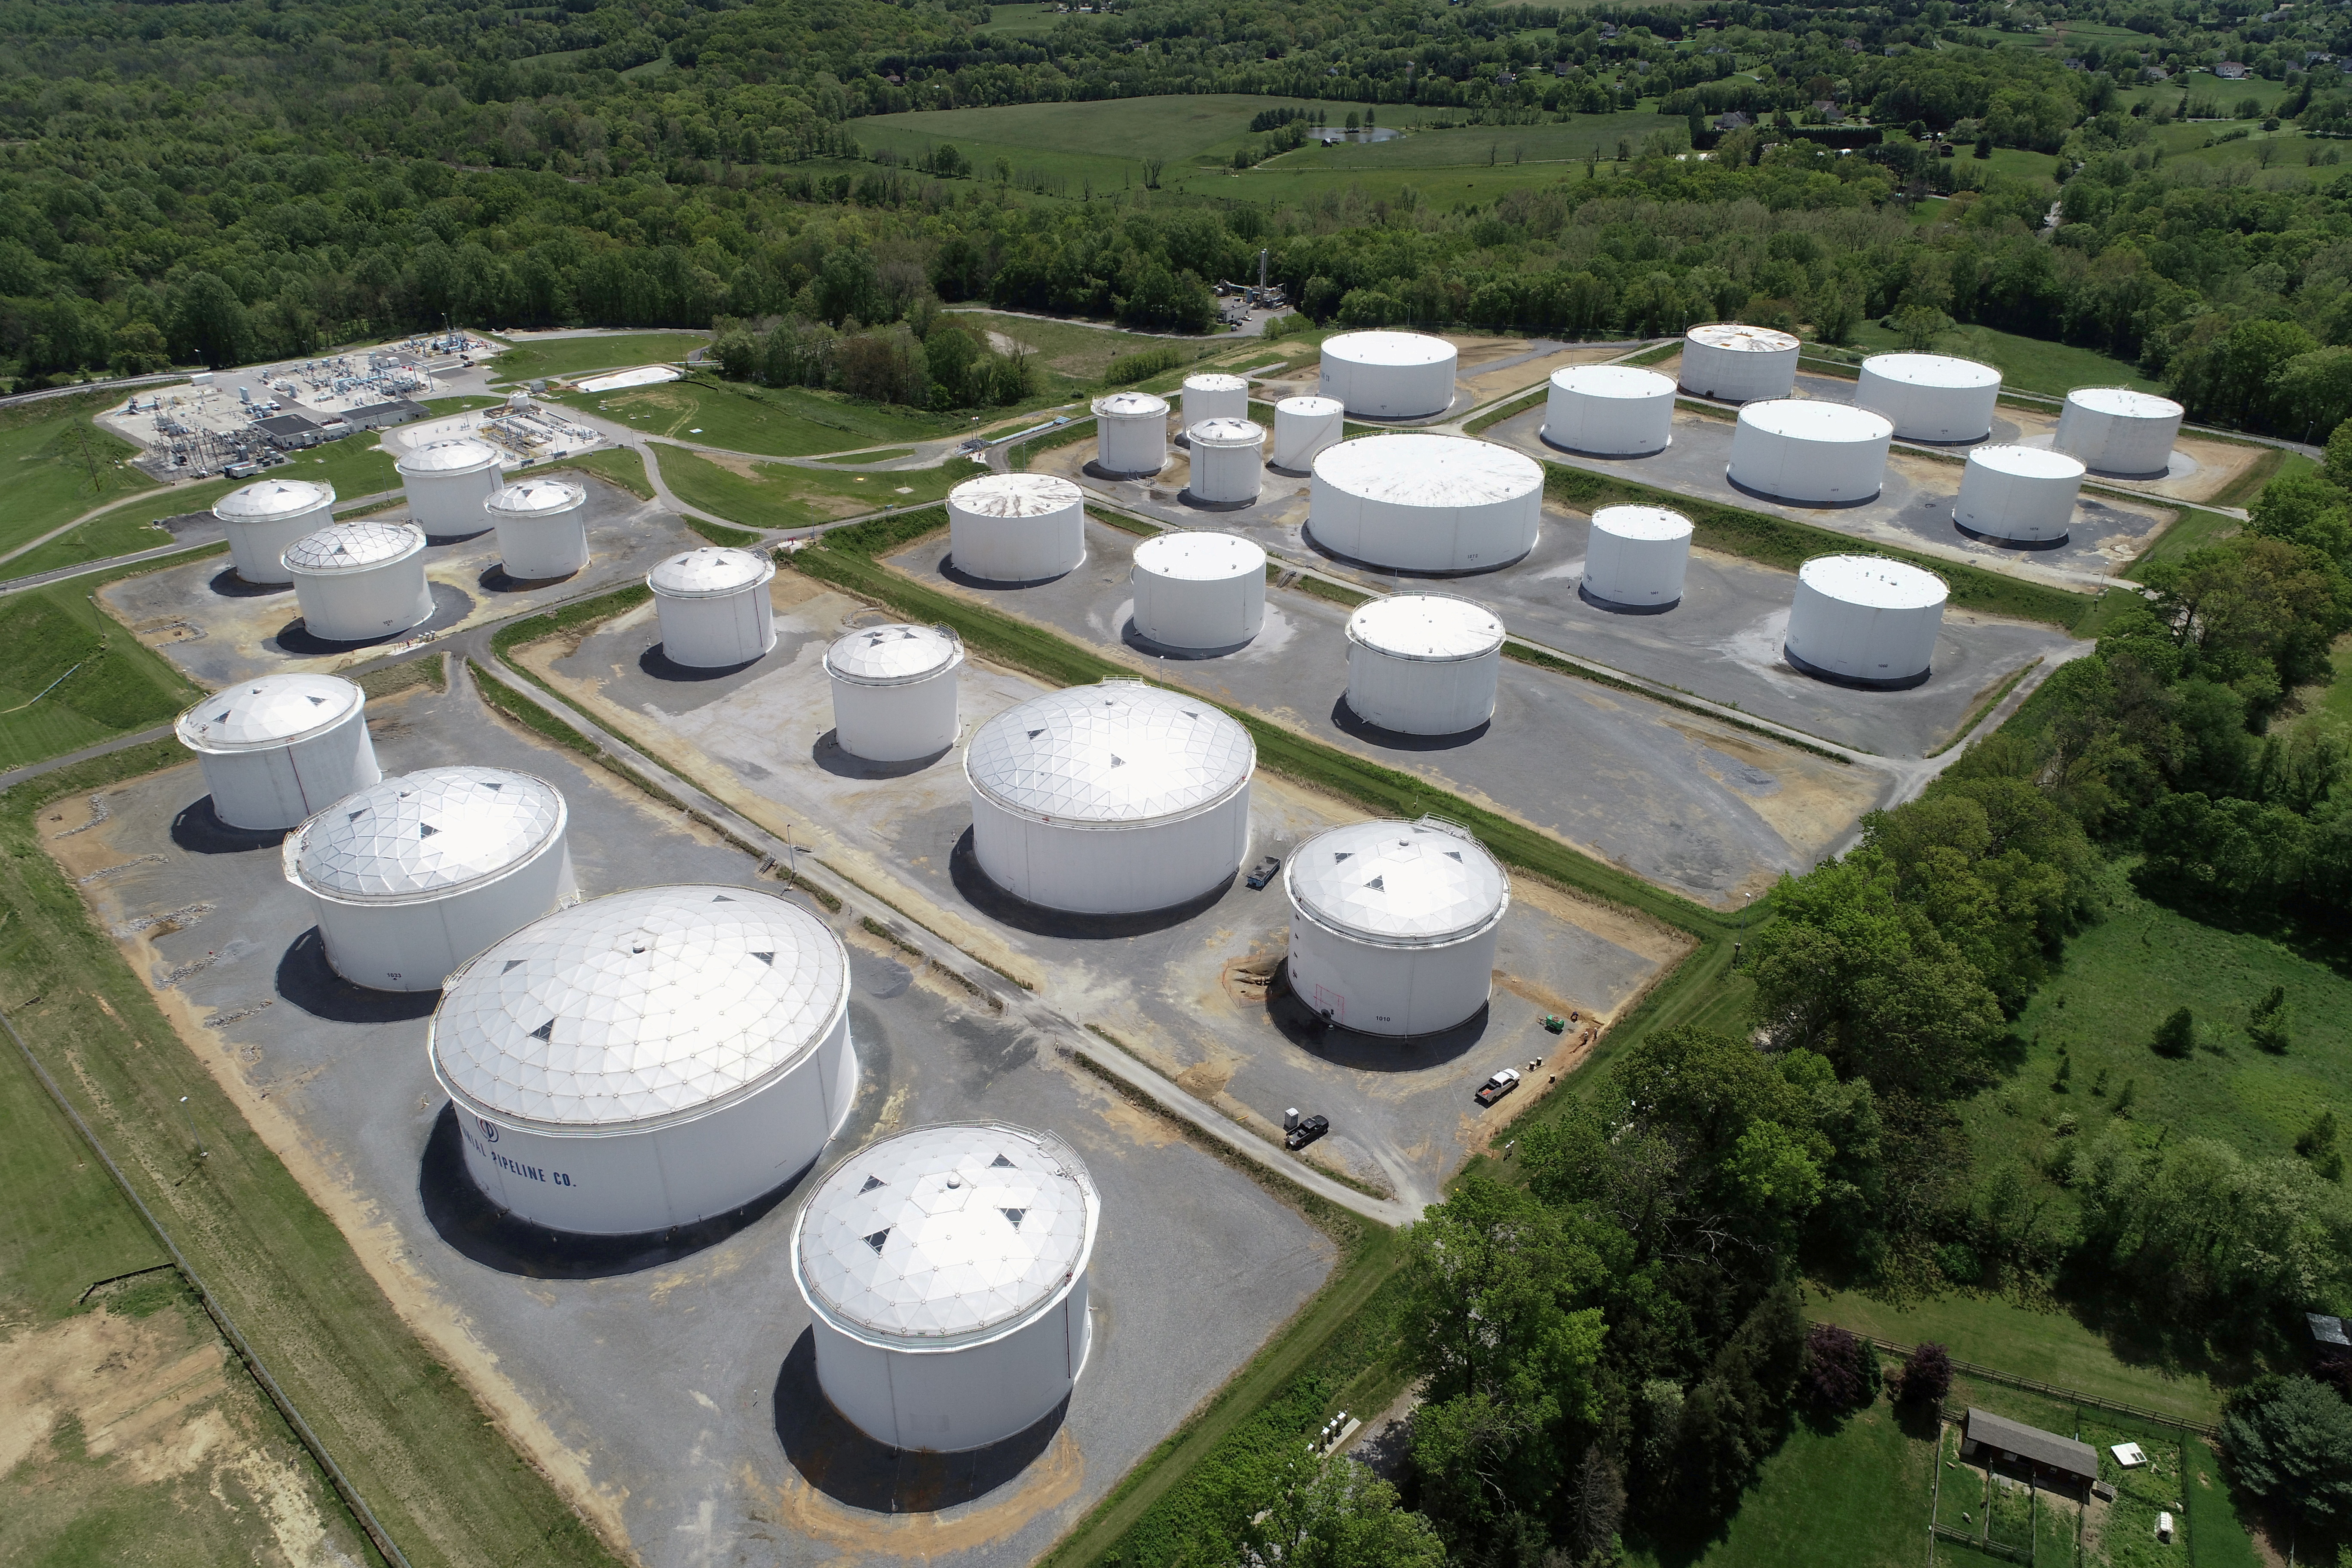 Holding tanks are seen in an aerial photograph at Colonial Pipeline's Dorsey Junction Station in Woodbine, Maryland, U.S. May 10, 2021. REUTERS/Drone Base/File Photo